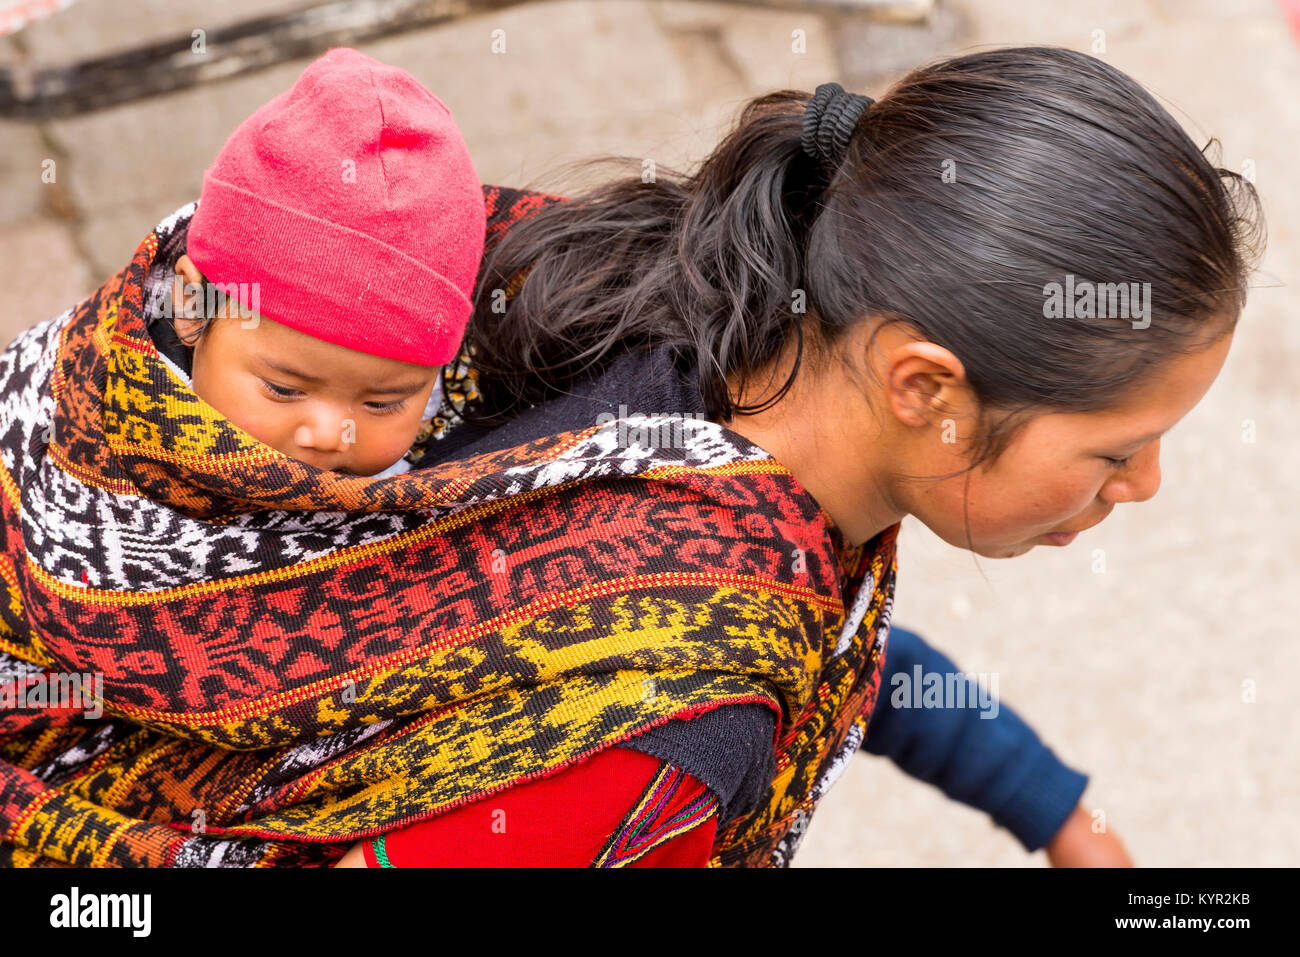 SAN JUAN OSTUNCALCO, GUATEMALA - JUNE 24: An unidentified baby carried in a traditional woven material sling on a womans back at the San Juan Ostuncal Stock Photo